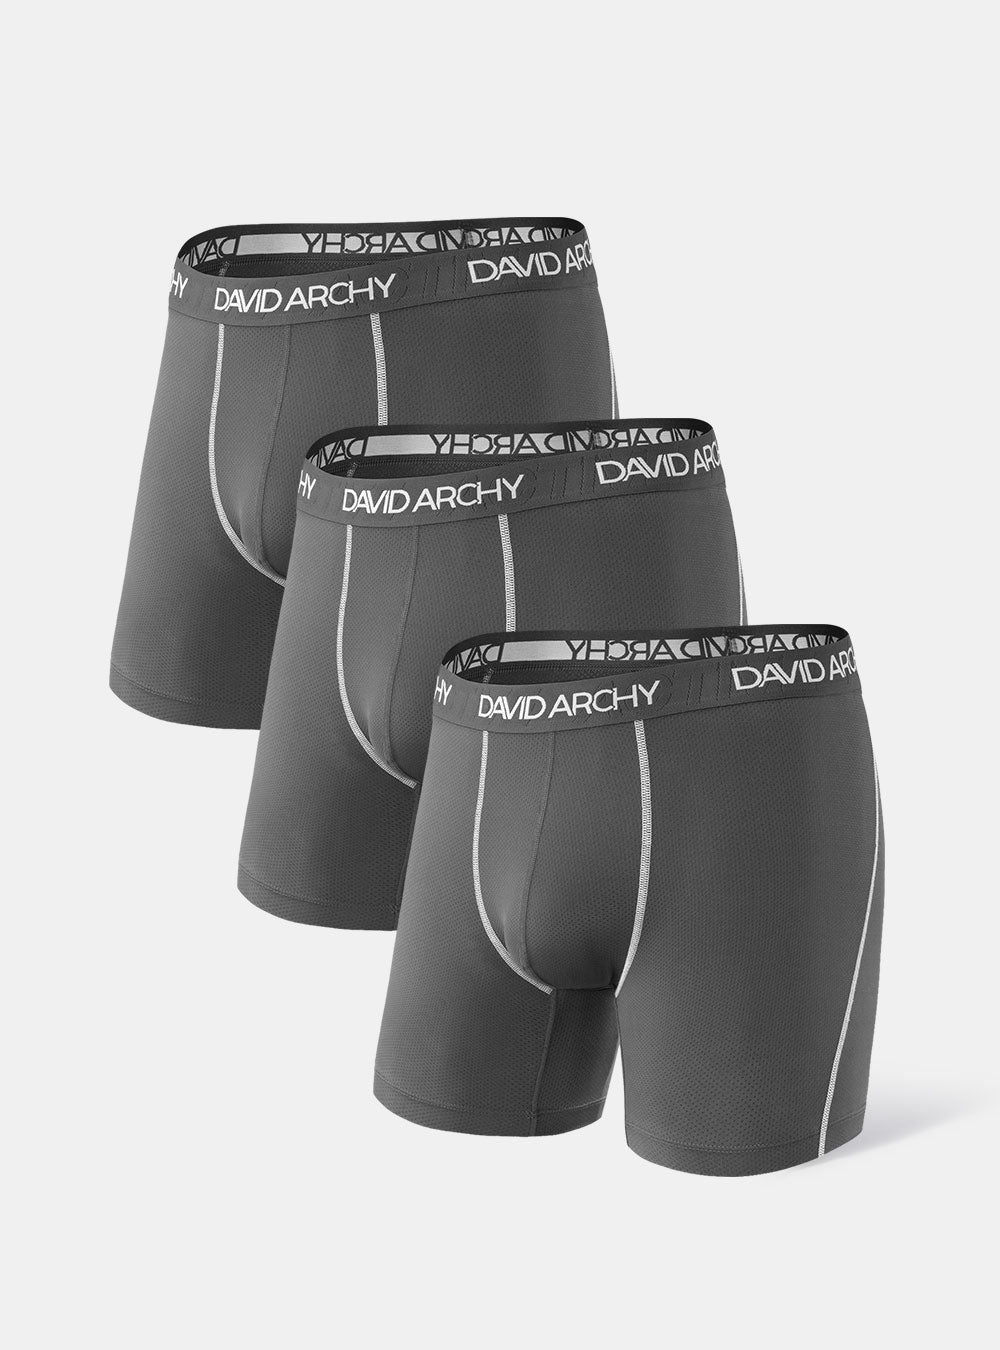 3 Packs Long Boxers Brief Quick Dry Sports David Archy Comfortable  Breathable Underwear For Men